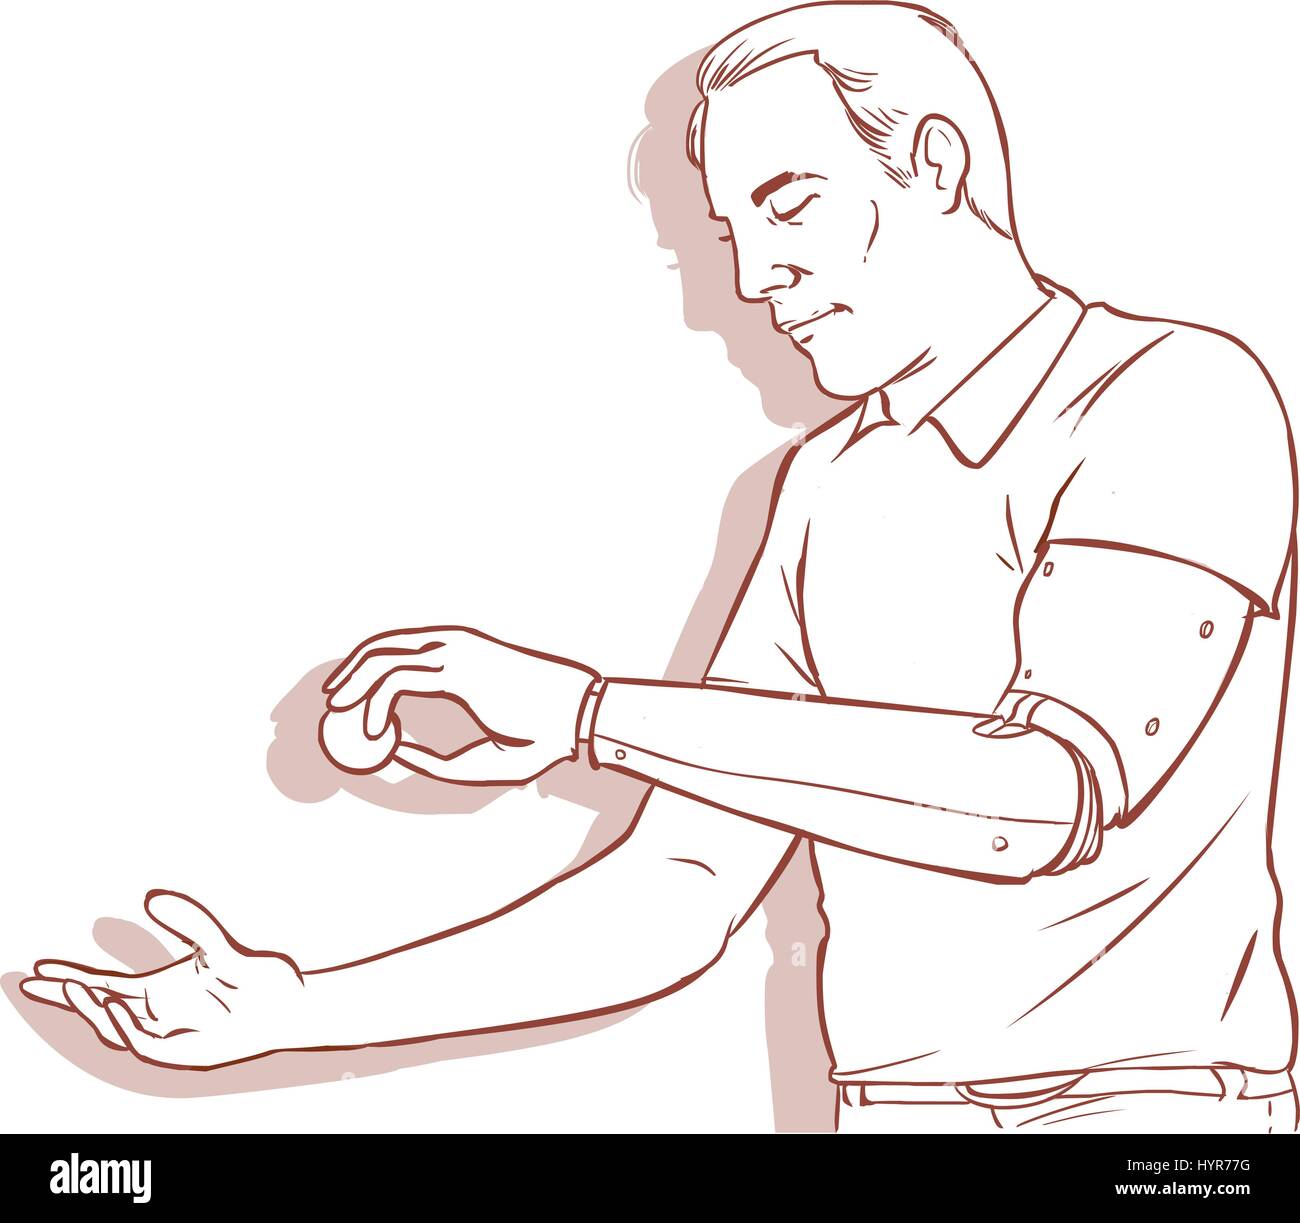 vector illustration of a Man using His Prosthetic Arm Stock Vector